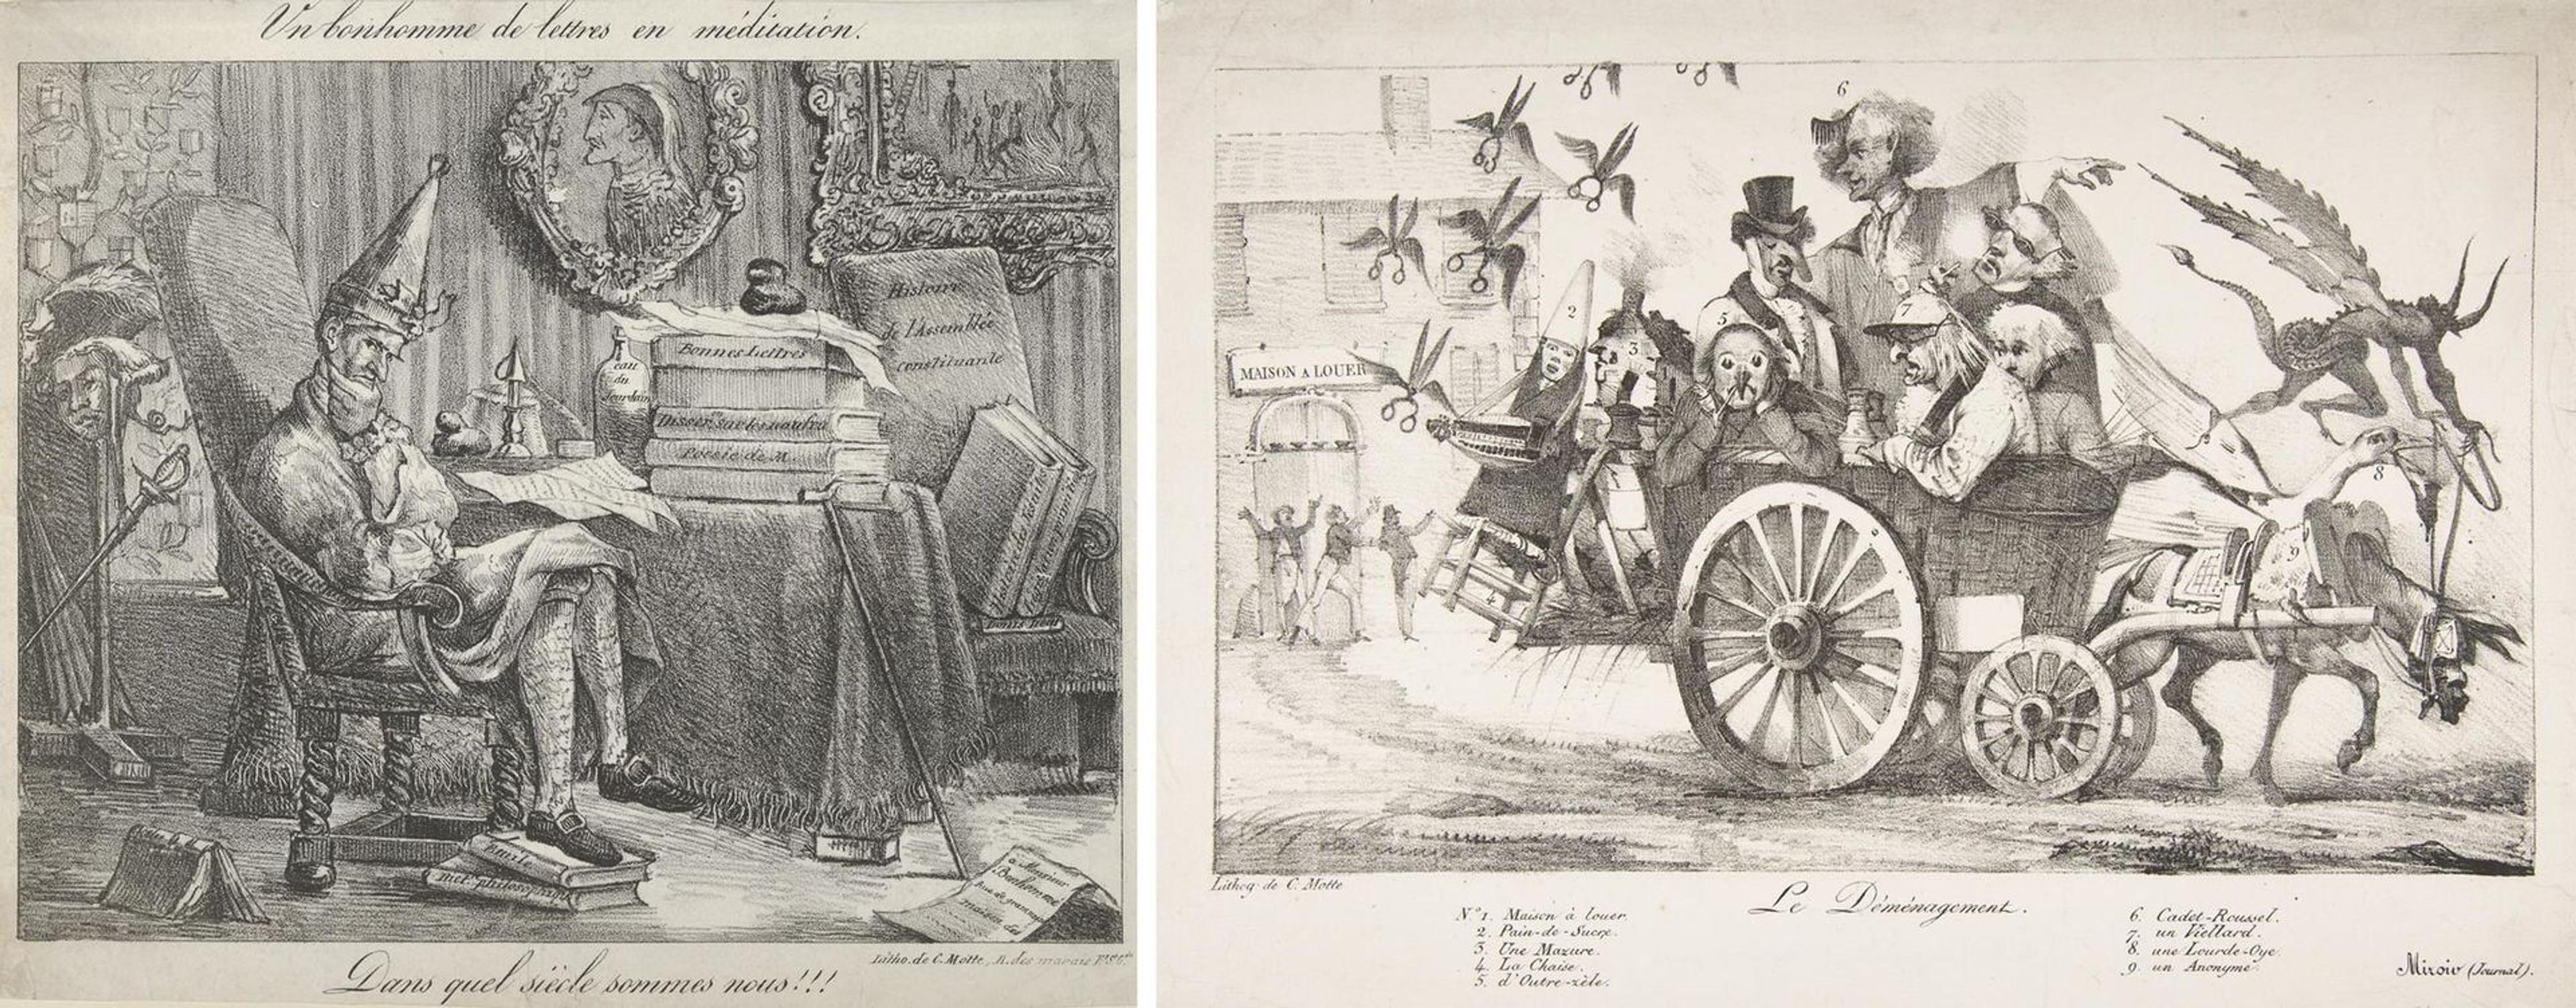 Two lithographs by Eugene Delacroix: one depicting a scholar meditating in his study (left) and the other a caricature of censors being transported from a building in a cart (right)